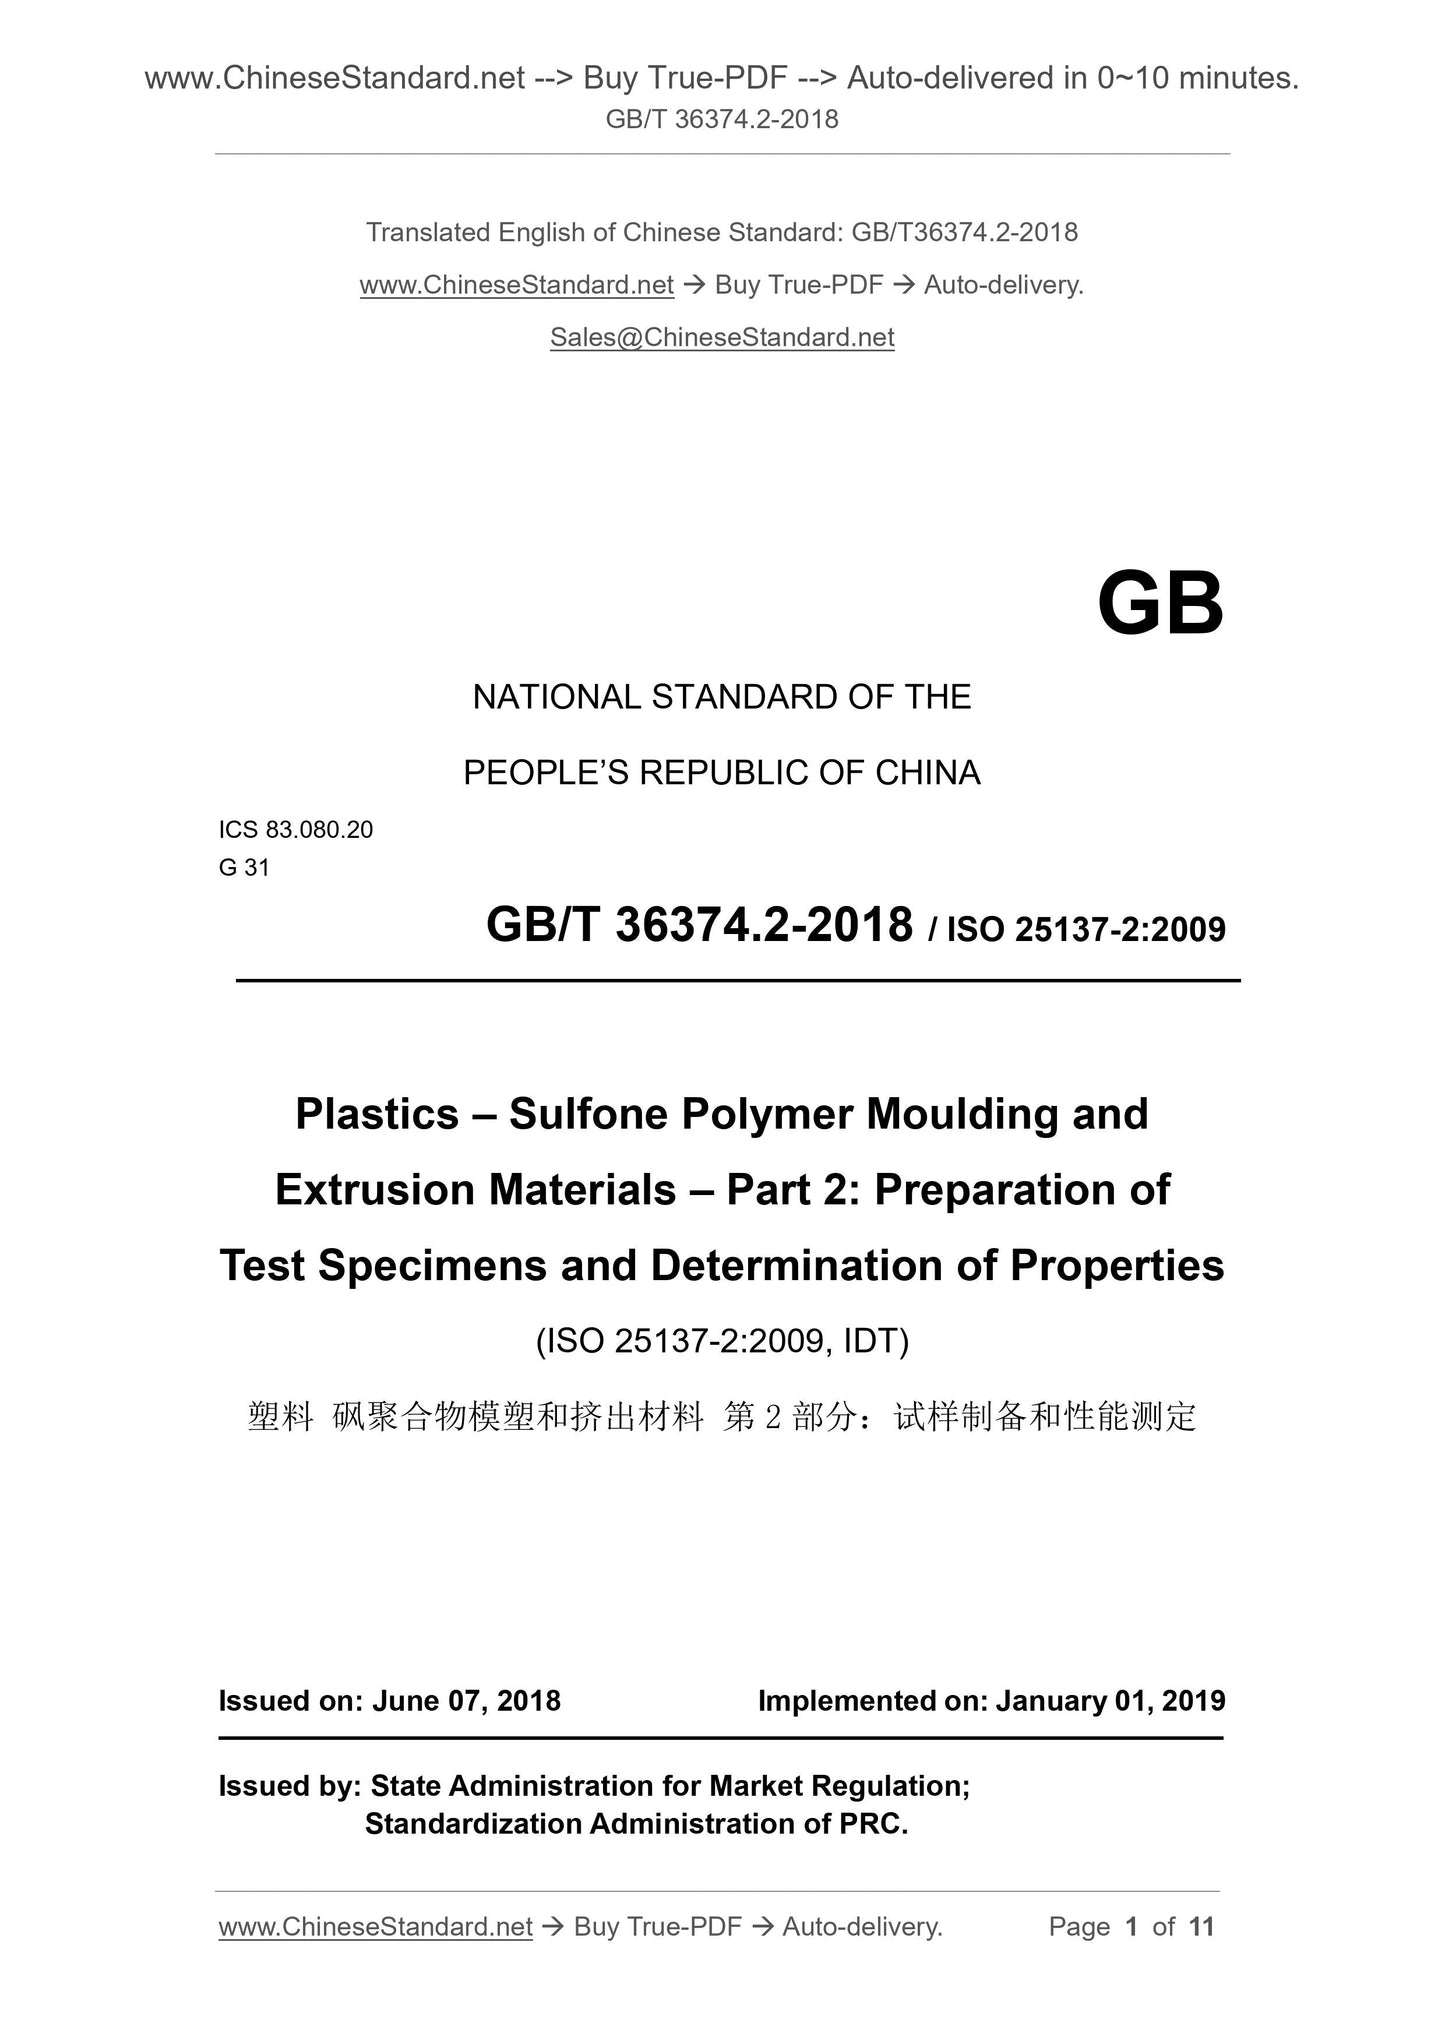 GB/T 36374.2-2018 Page 1